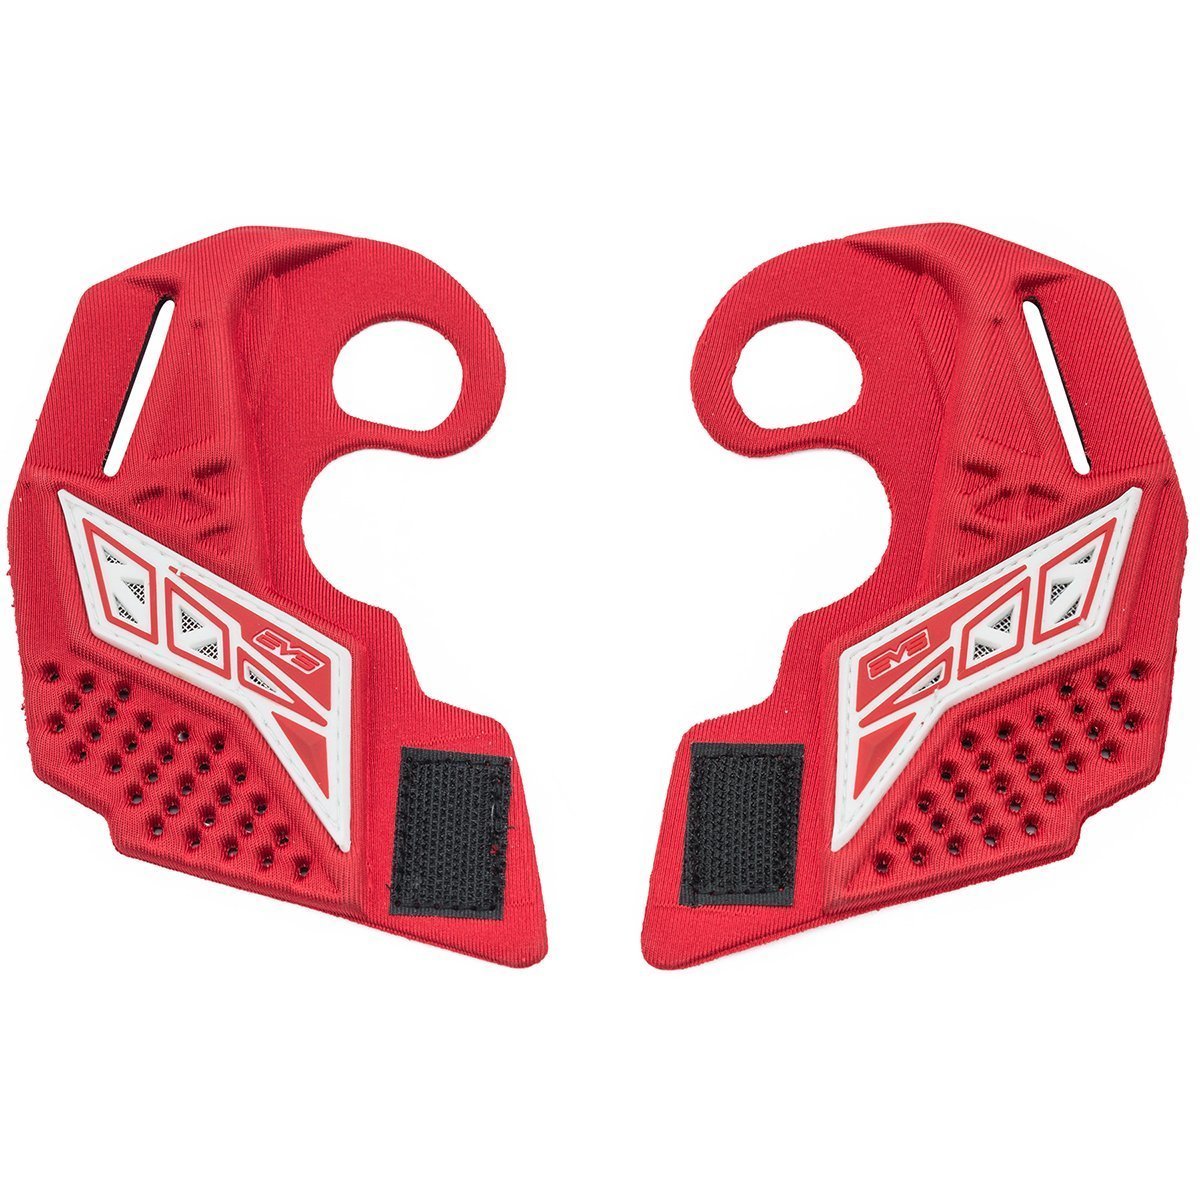 21642 Evs Ear Piece - Fits Evs Goggle - Red & White - Pair